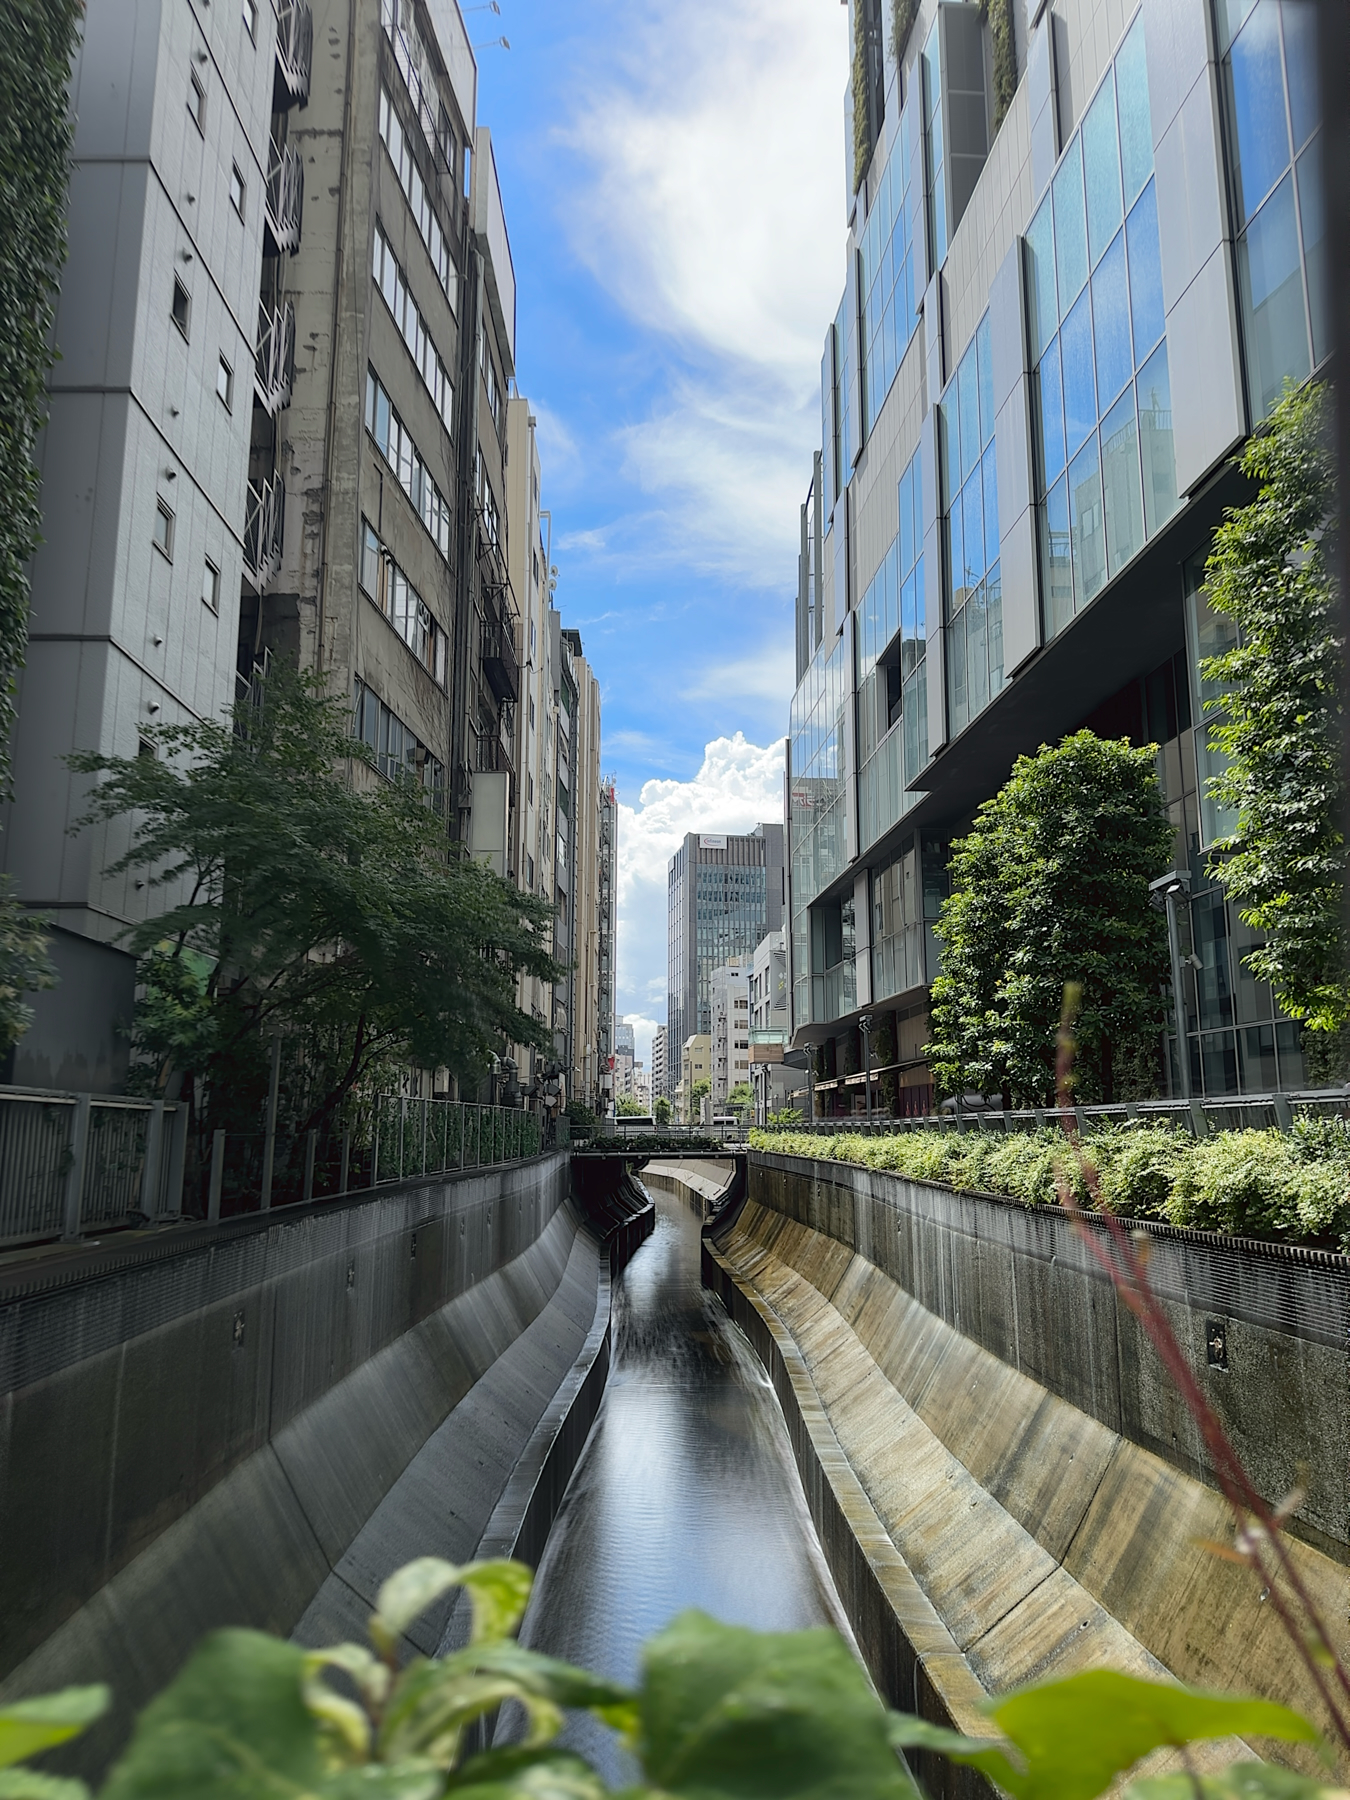 A time lapse of a man made river in the streets of Tokyo